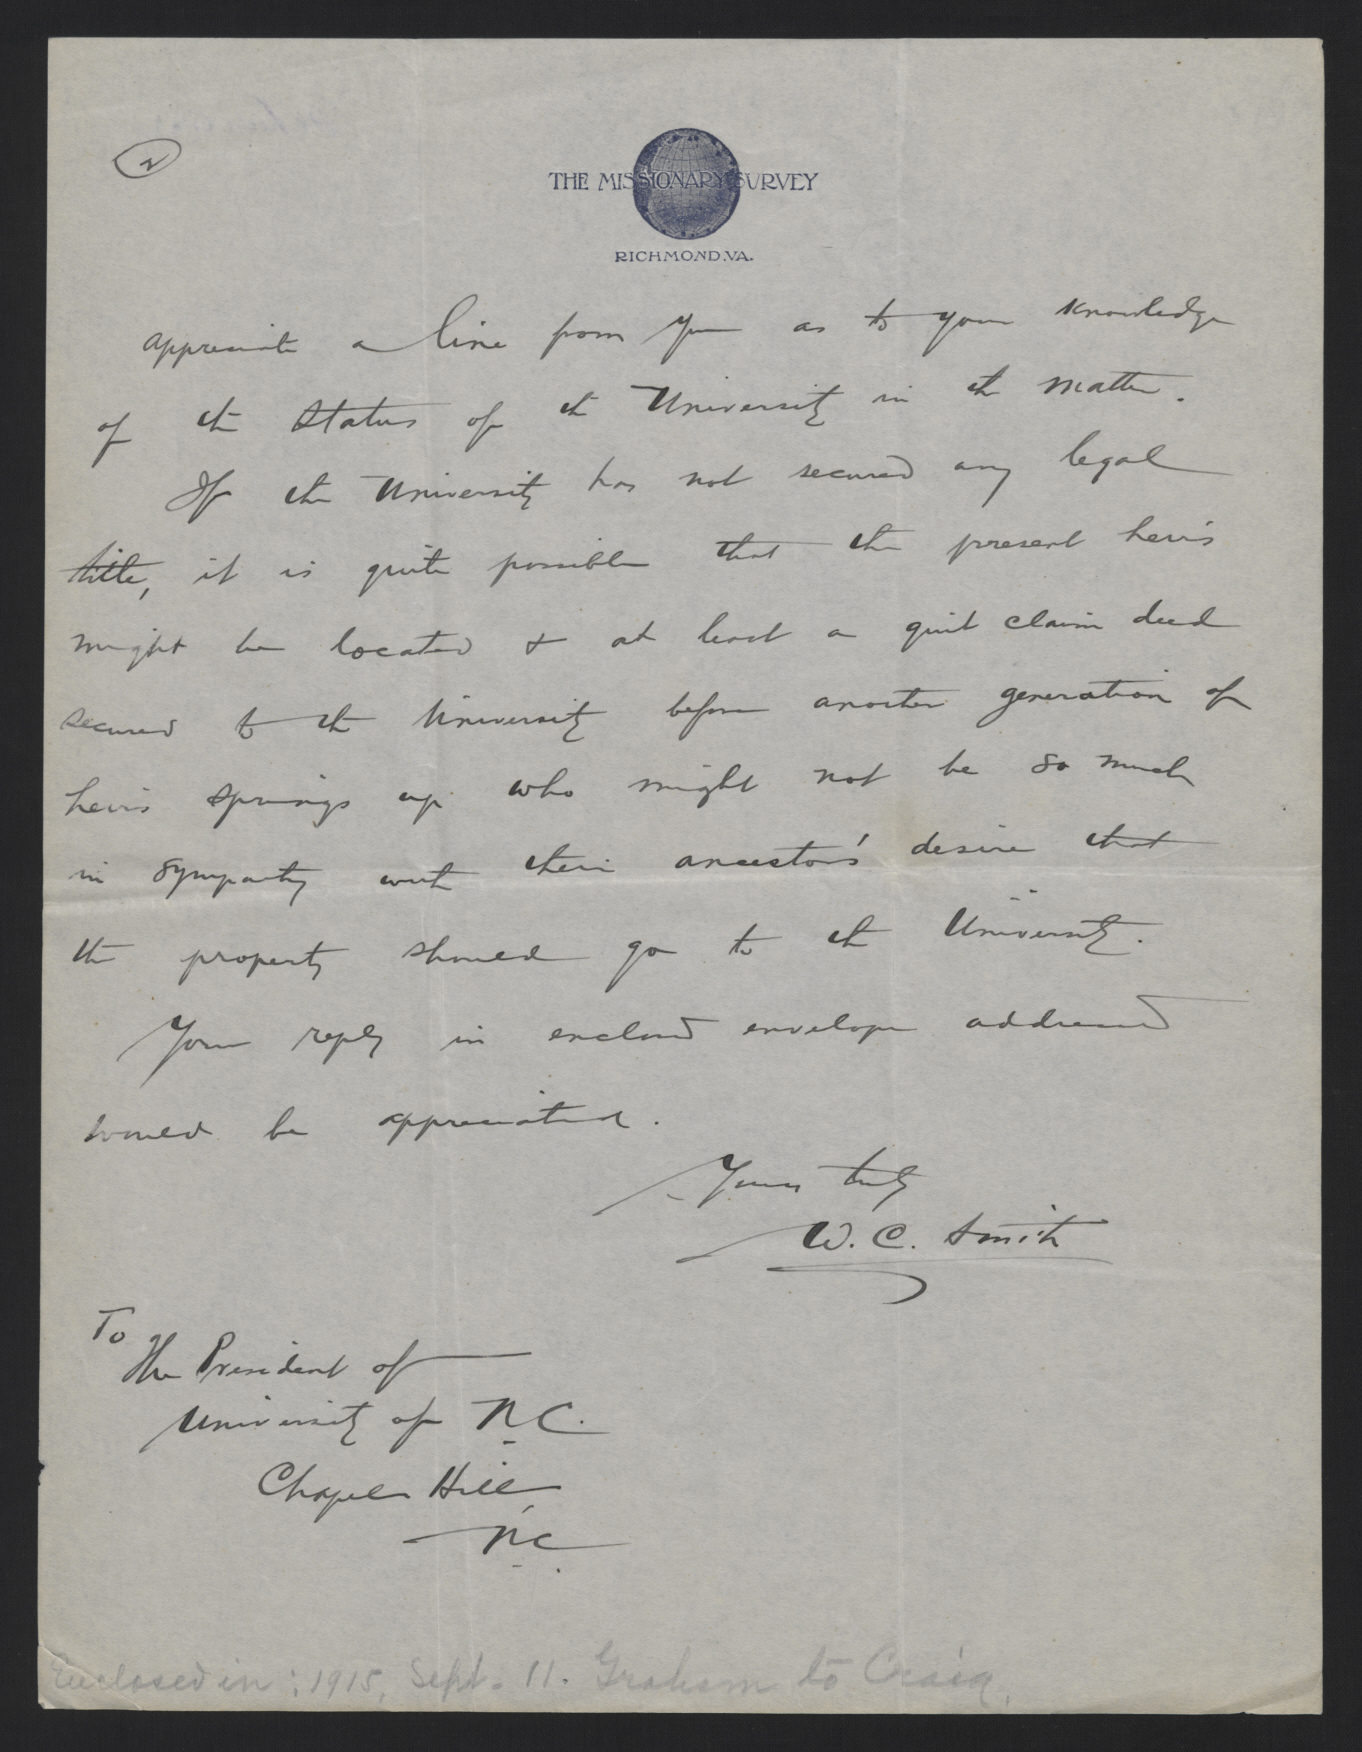 Letter from Smith to Graham, September 9, 1915, page 2